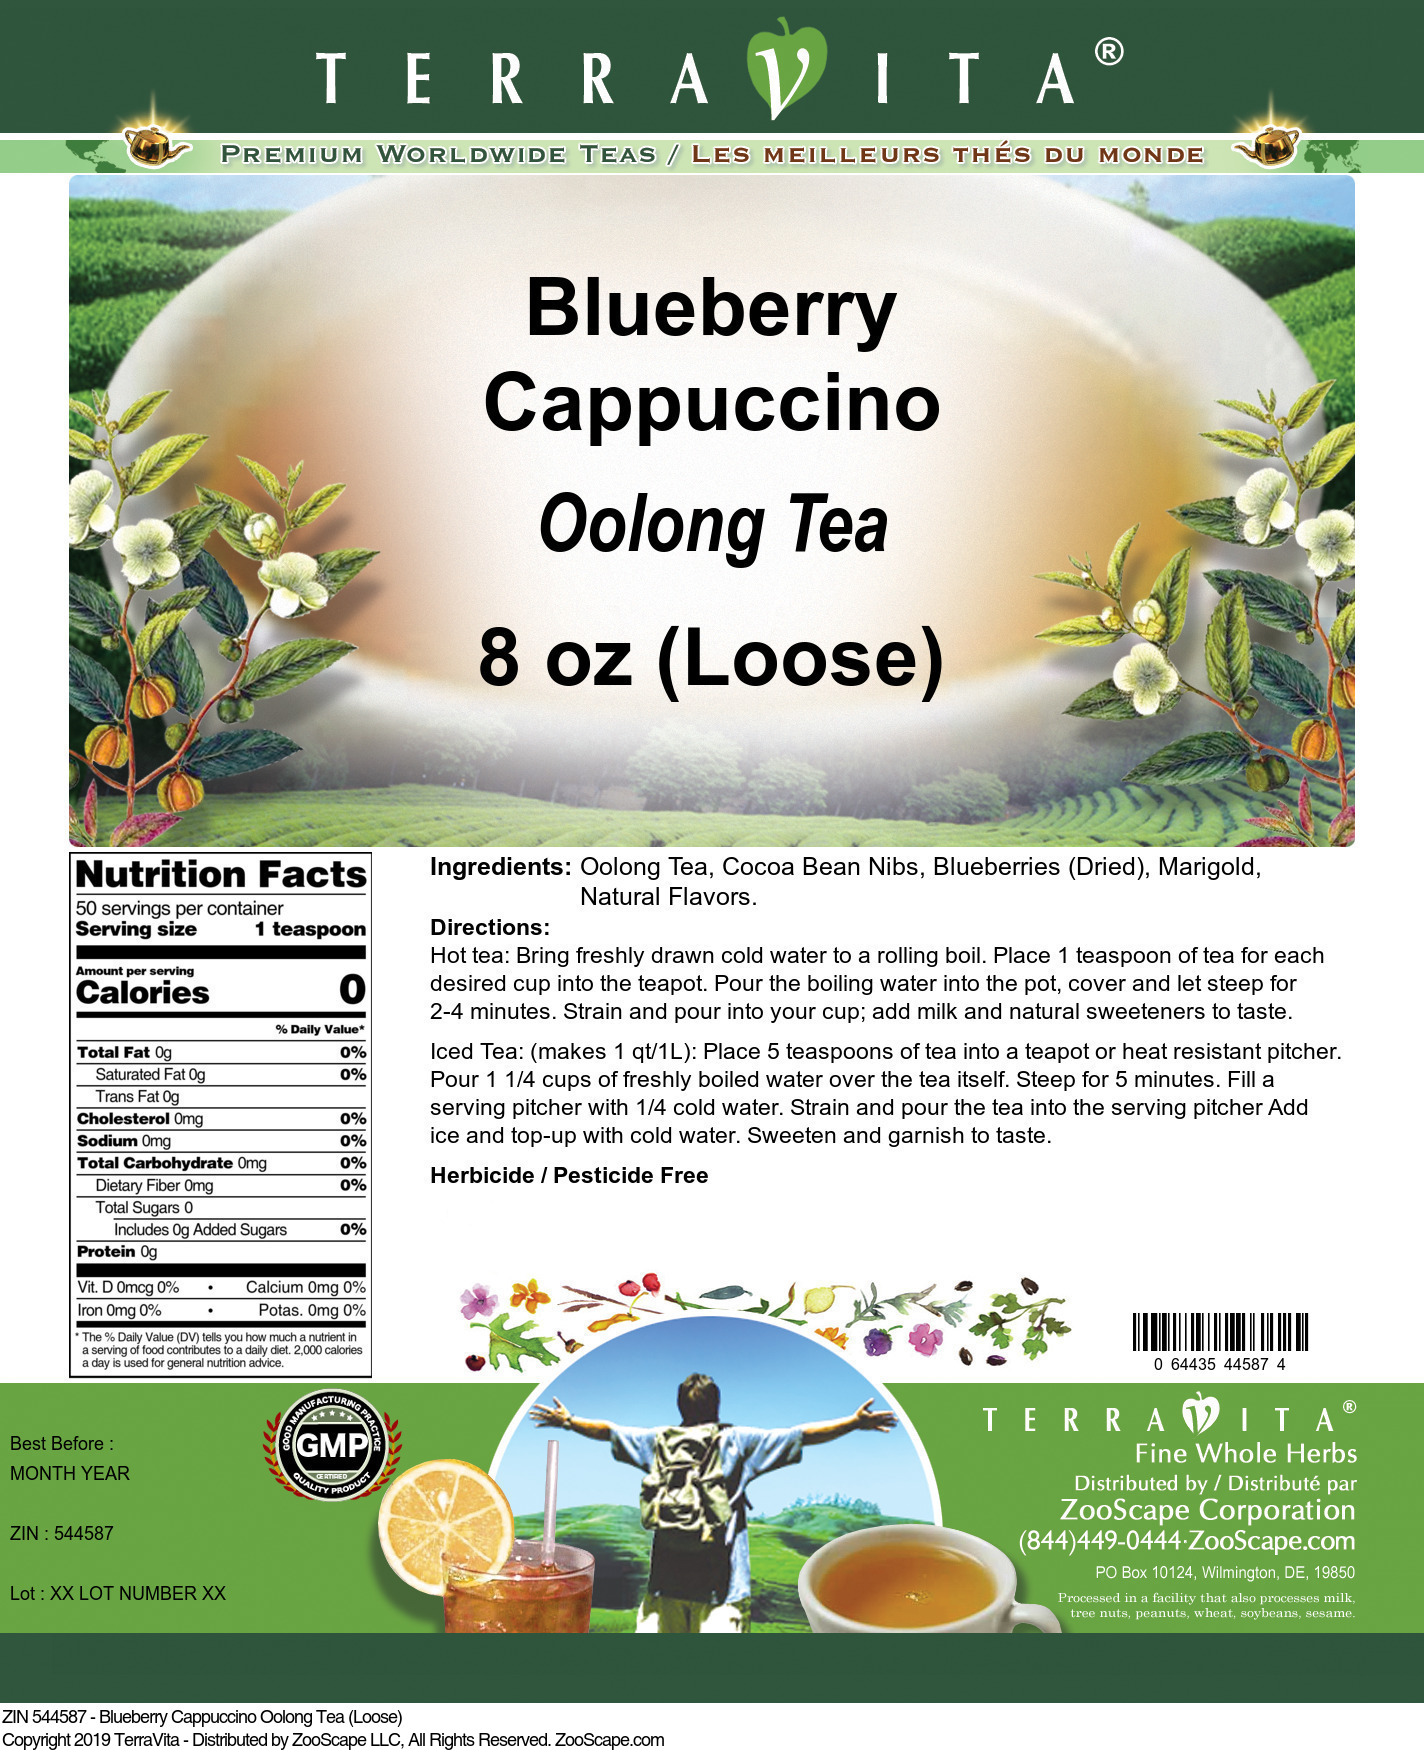 Blueberry Cappuccino Oolong Tea (Loose) - Label